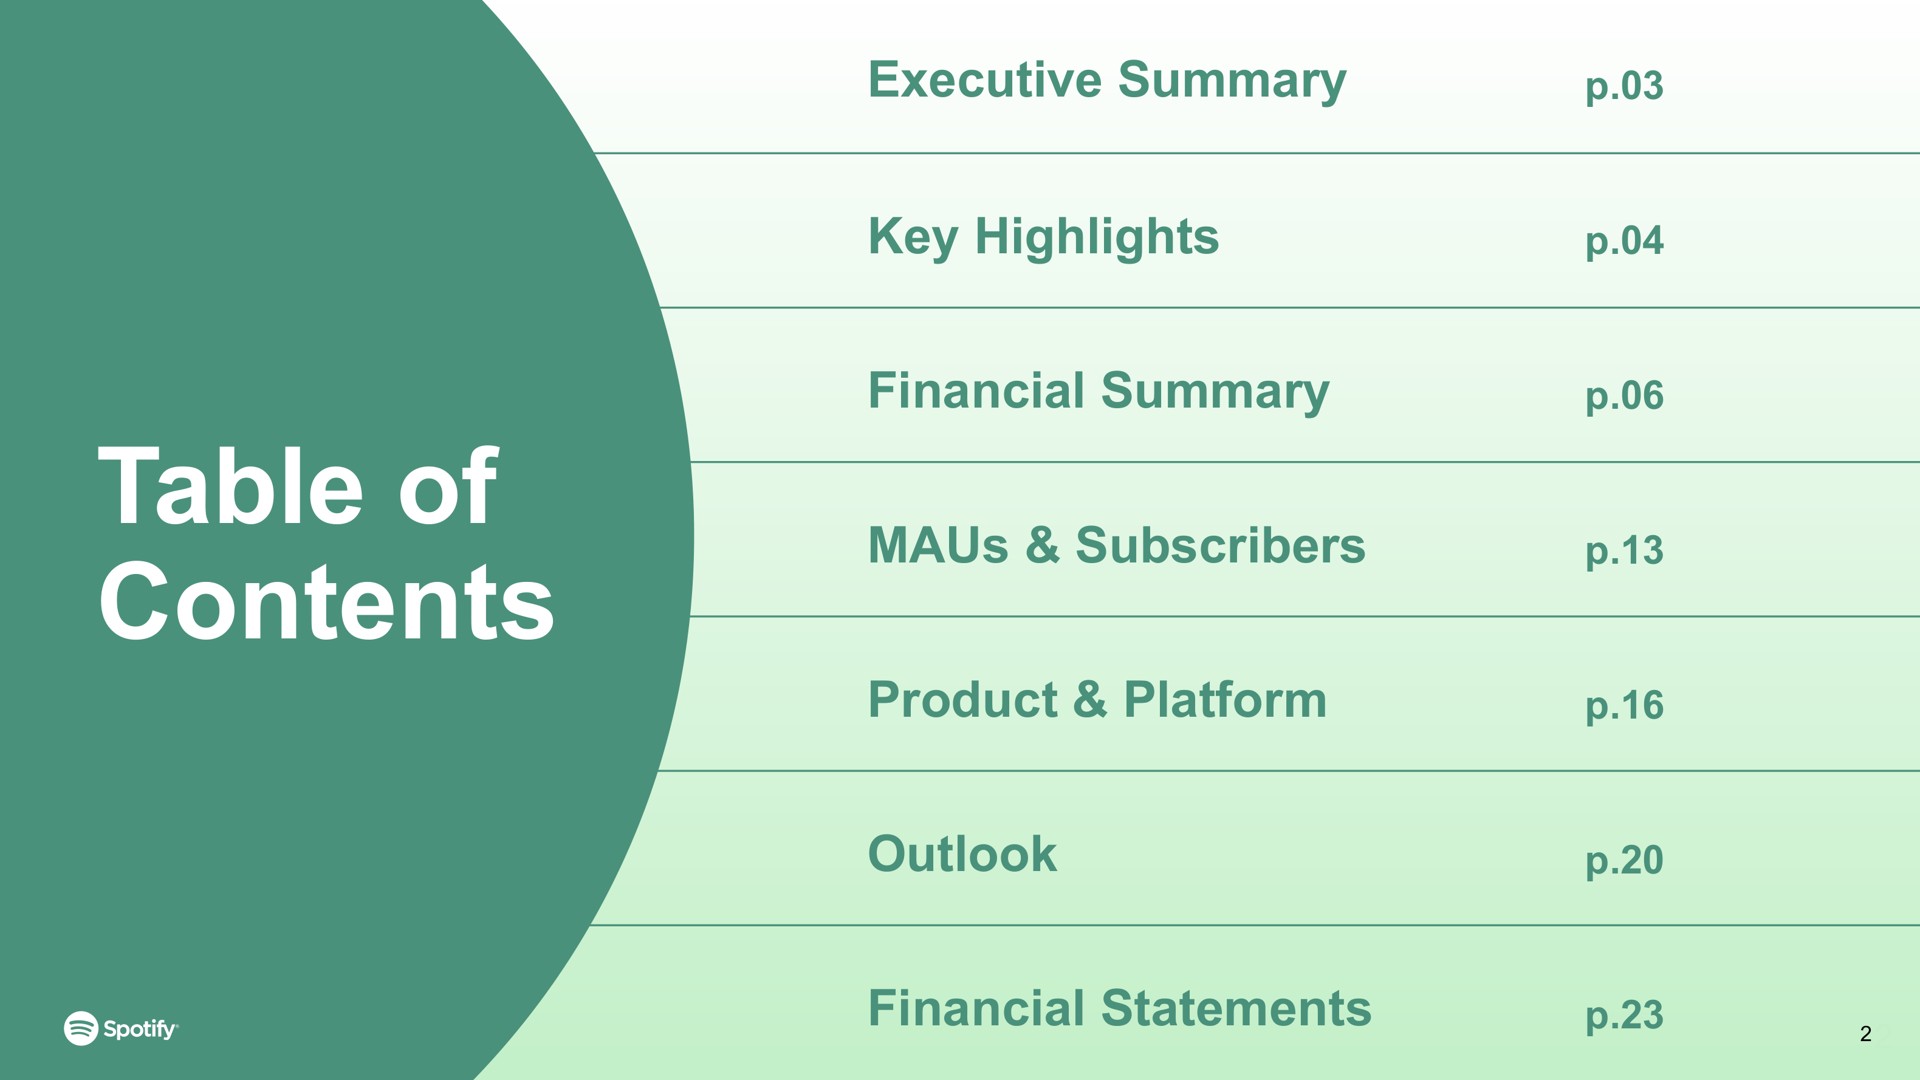 last updated on not a current version executive summary key highlights financial summary subscribers product platform outlook financial statements table of contents | Spotify